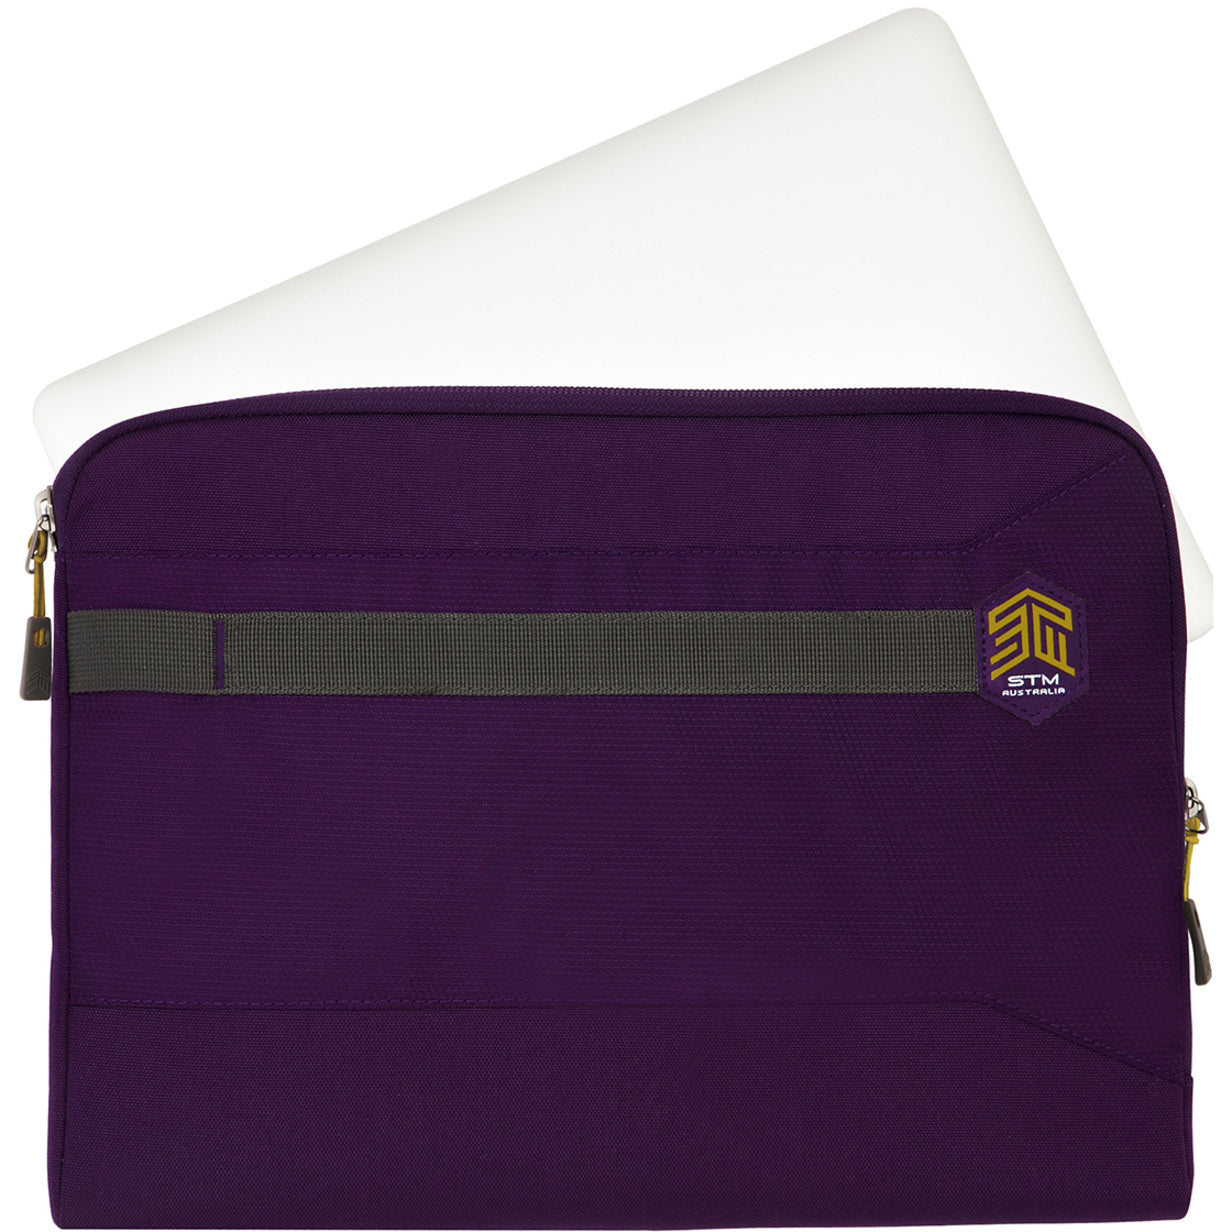 STM Goods STM-114-168P-53 Summary Laptop Sleeve, Durable Zipper Pull, Slim and Light Design, Easy Access, Water Resistant, Royal Purple